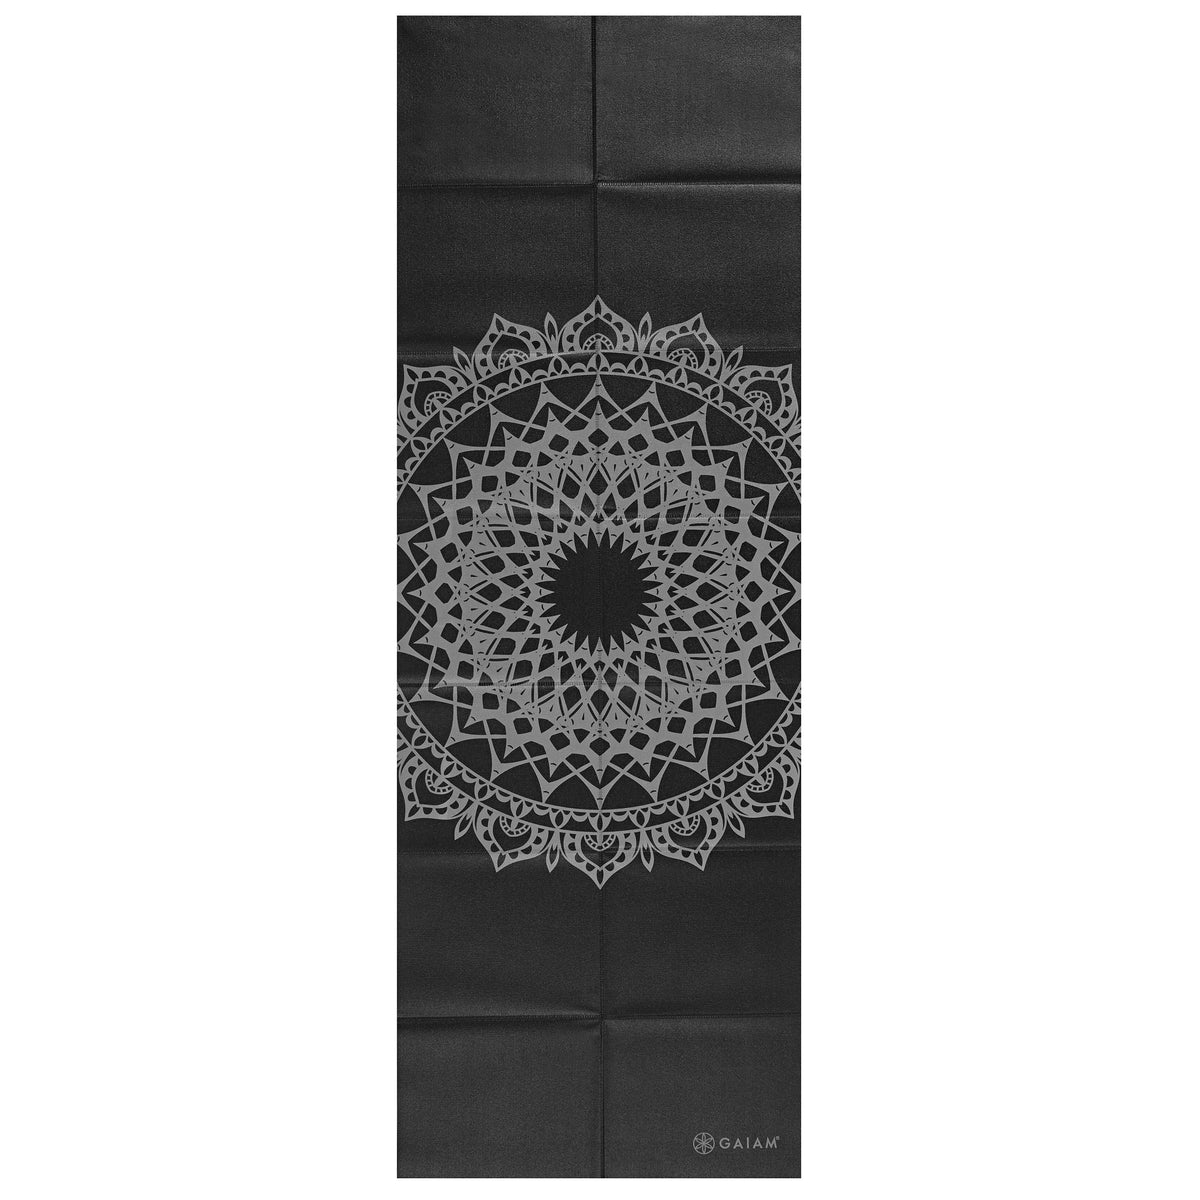 Gaiam 2mm Foldable Yoga Mat Travel Fitness Exercise Compact 68L x